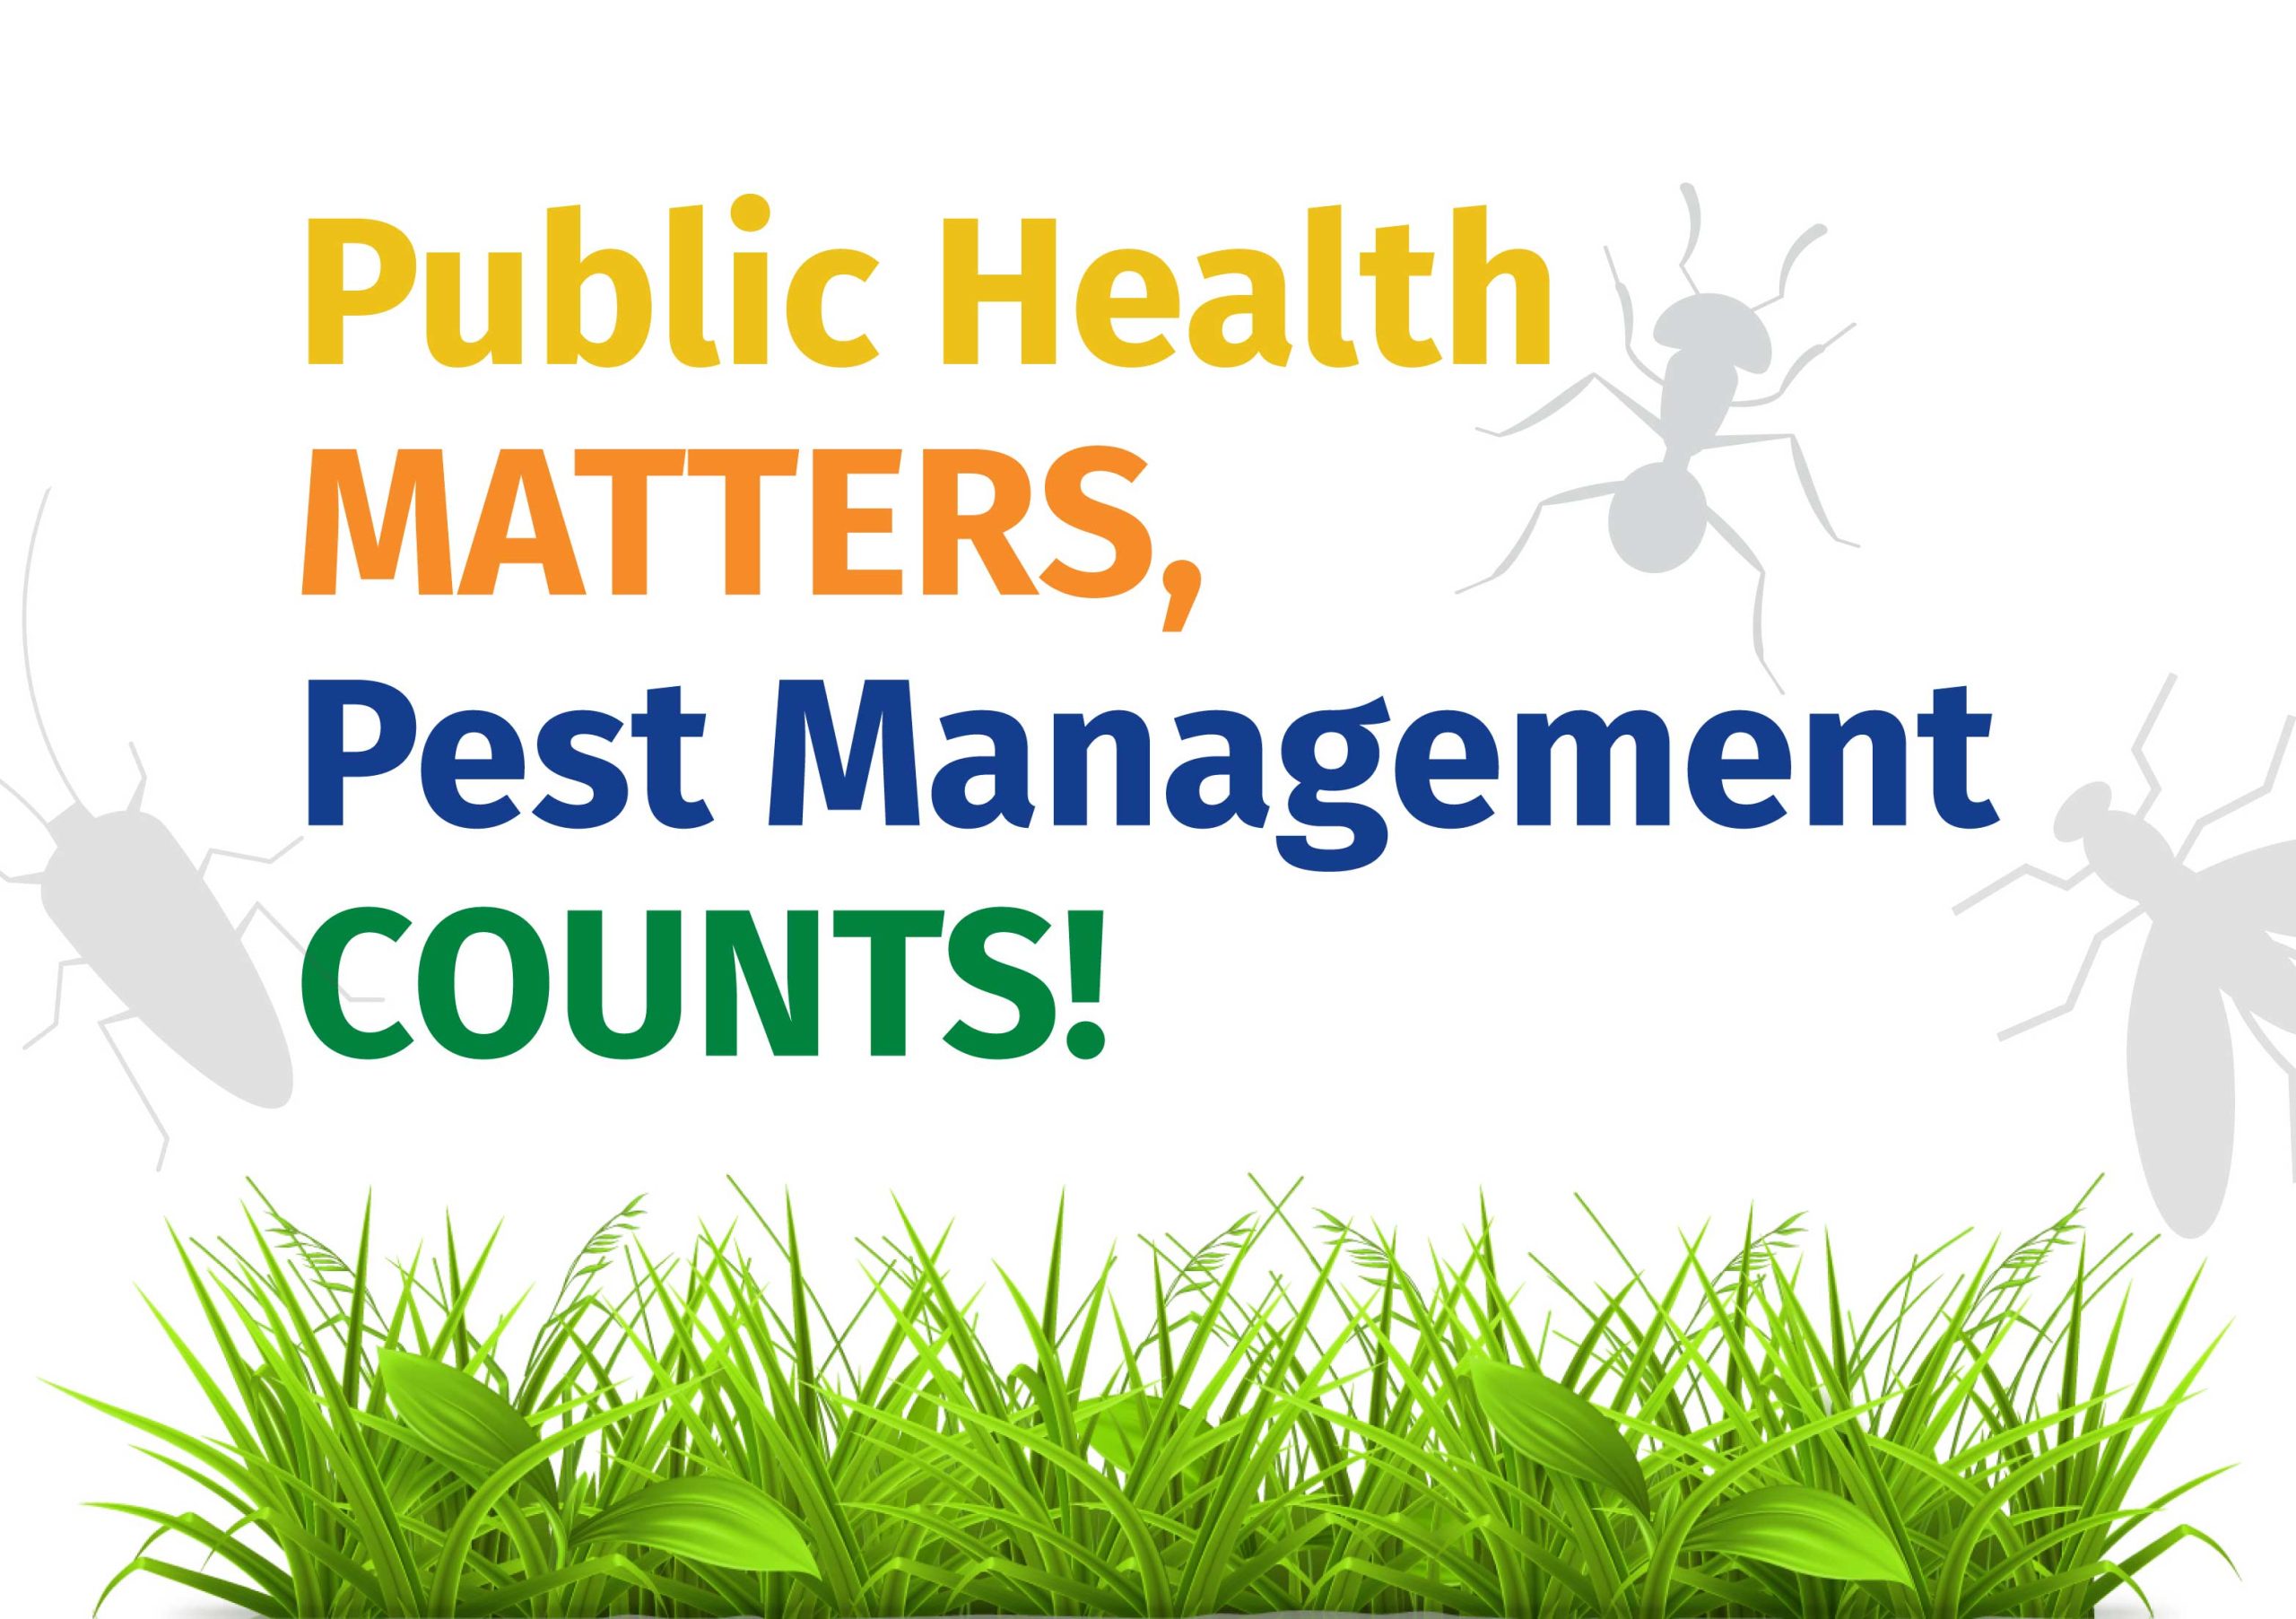 Public Health Matters, Pest Management Counts, Shadows of ant, mosquito and cockroach shown, as well as green grass.